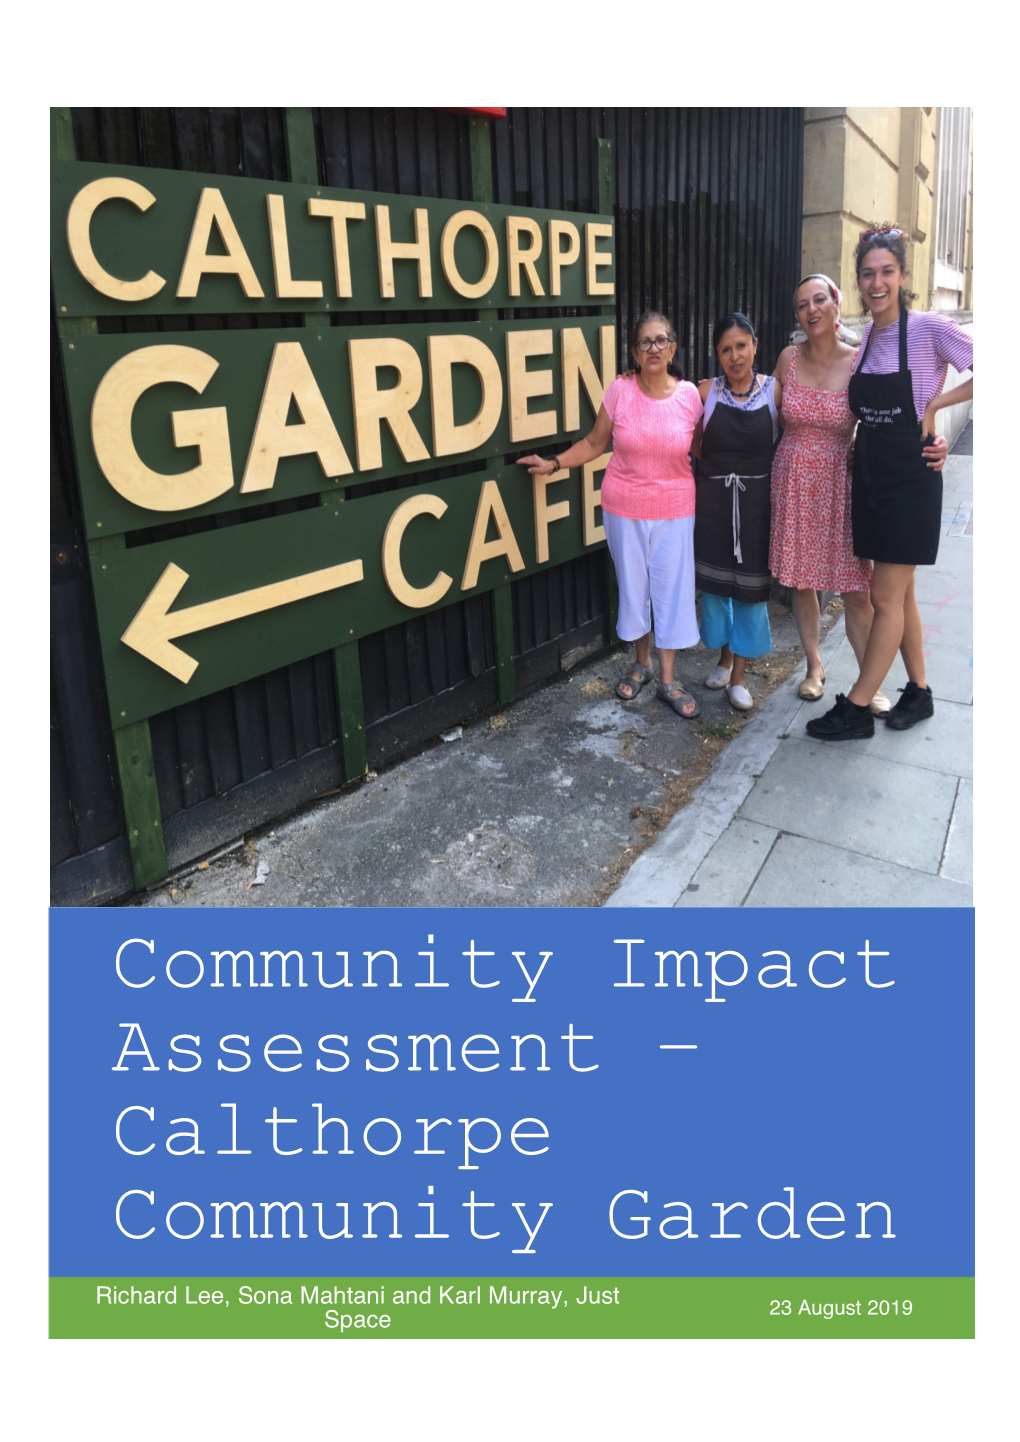 Community Impact Assessment – Calthorpe Community Garden Richard Lee, Sona Mahtani and Karl Murray, Just 23 August 2019 Space